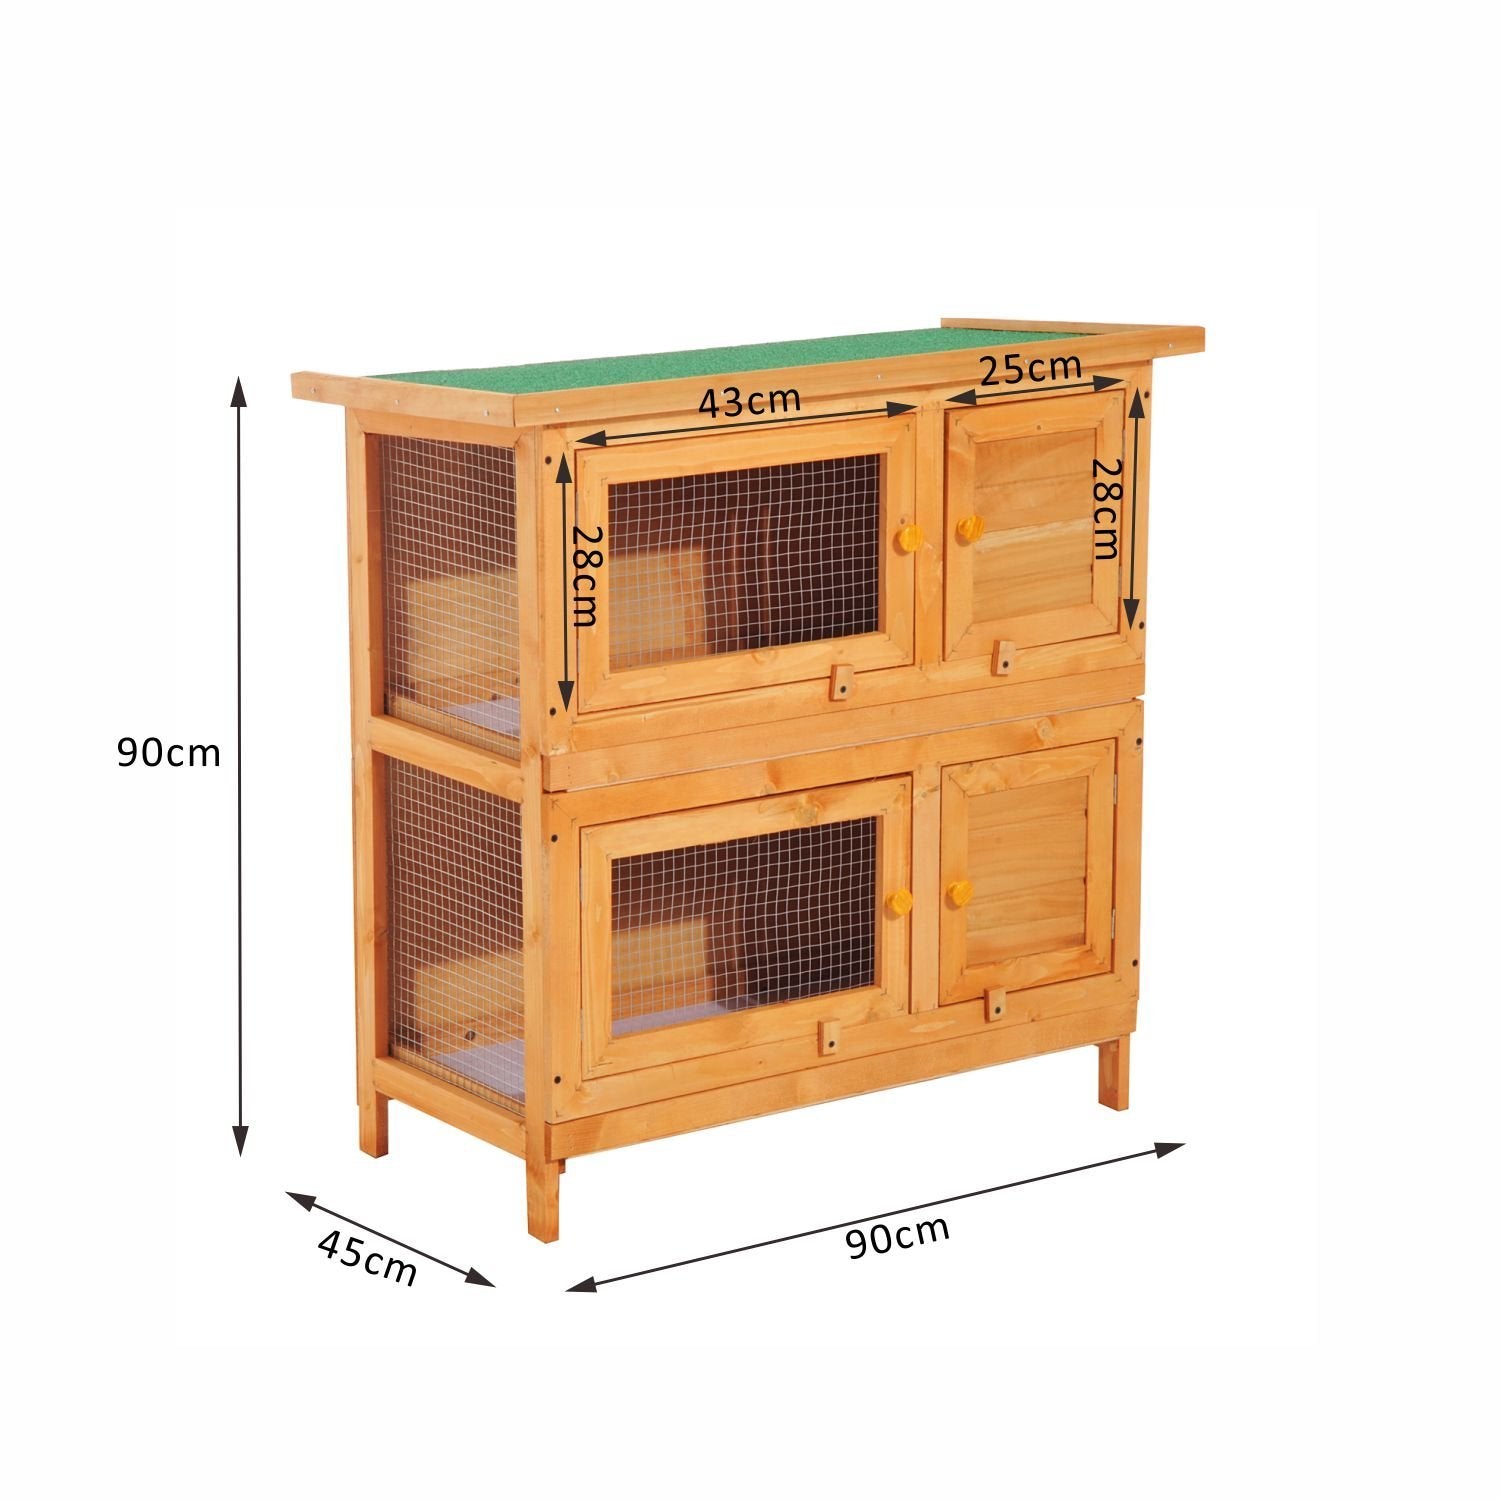 90cm 2 Tiers Rabbit Hutch Wooden Pet Cage W/ Run Bunny House-0